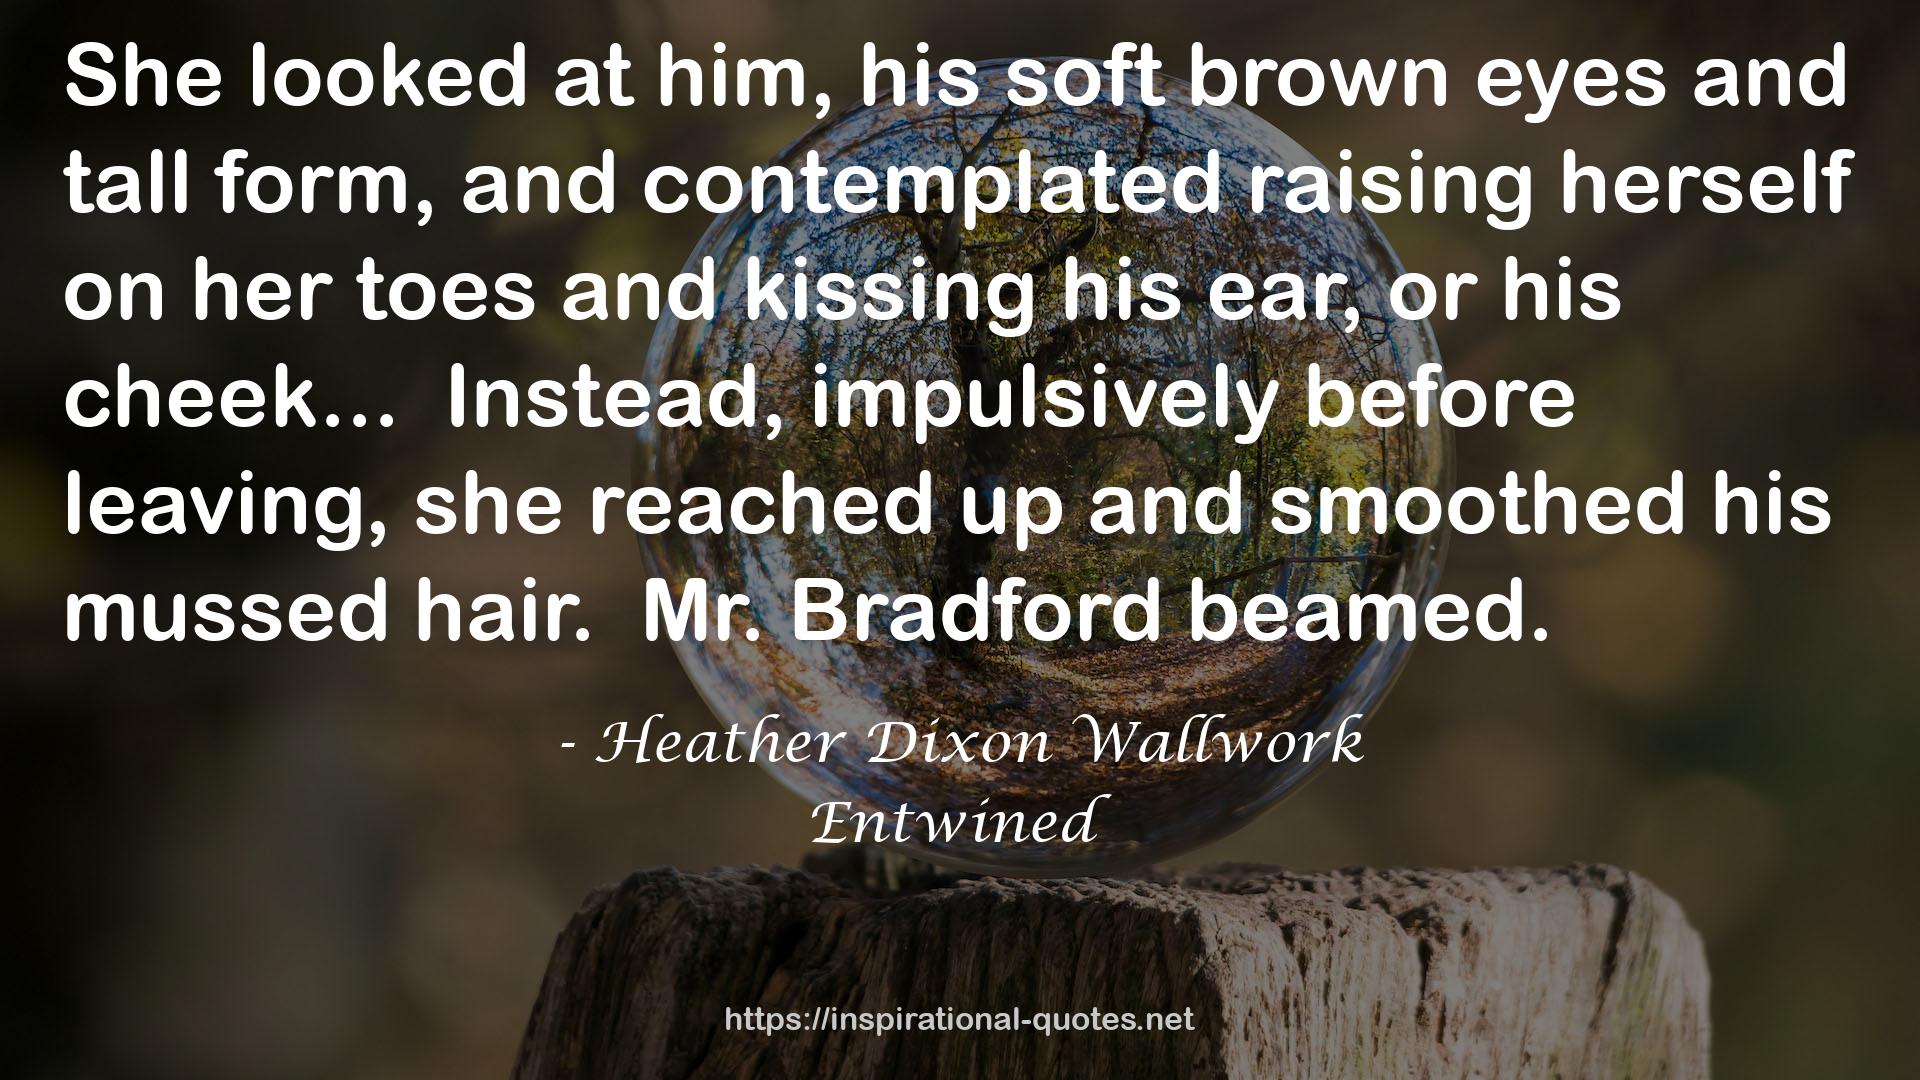 Entwined QUOTES